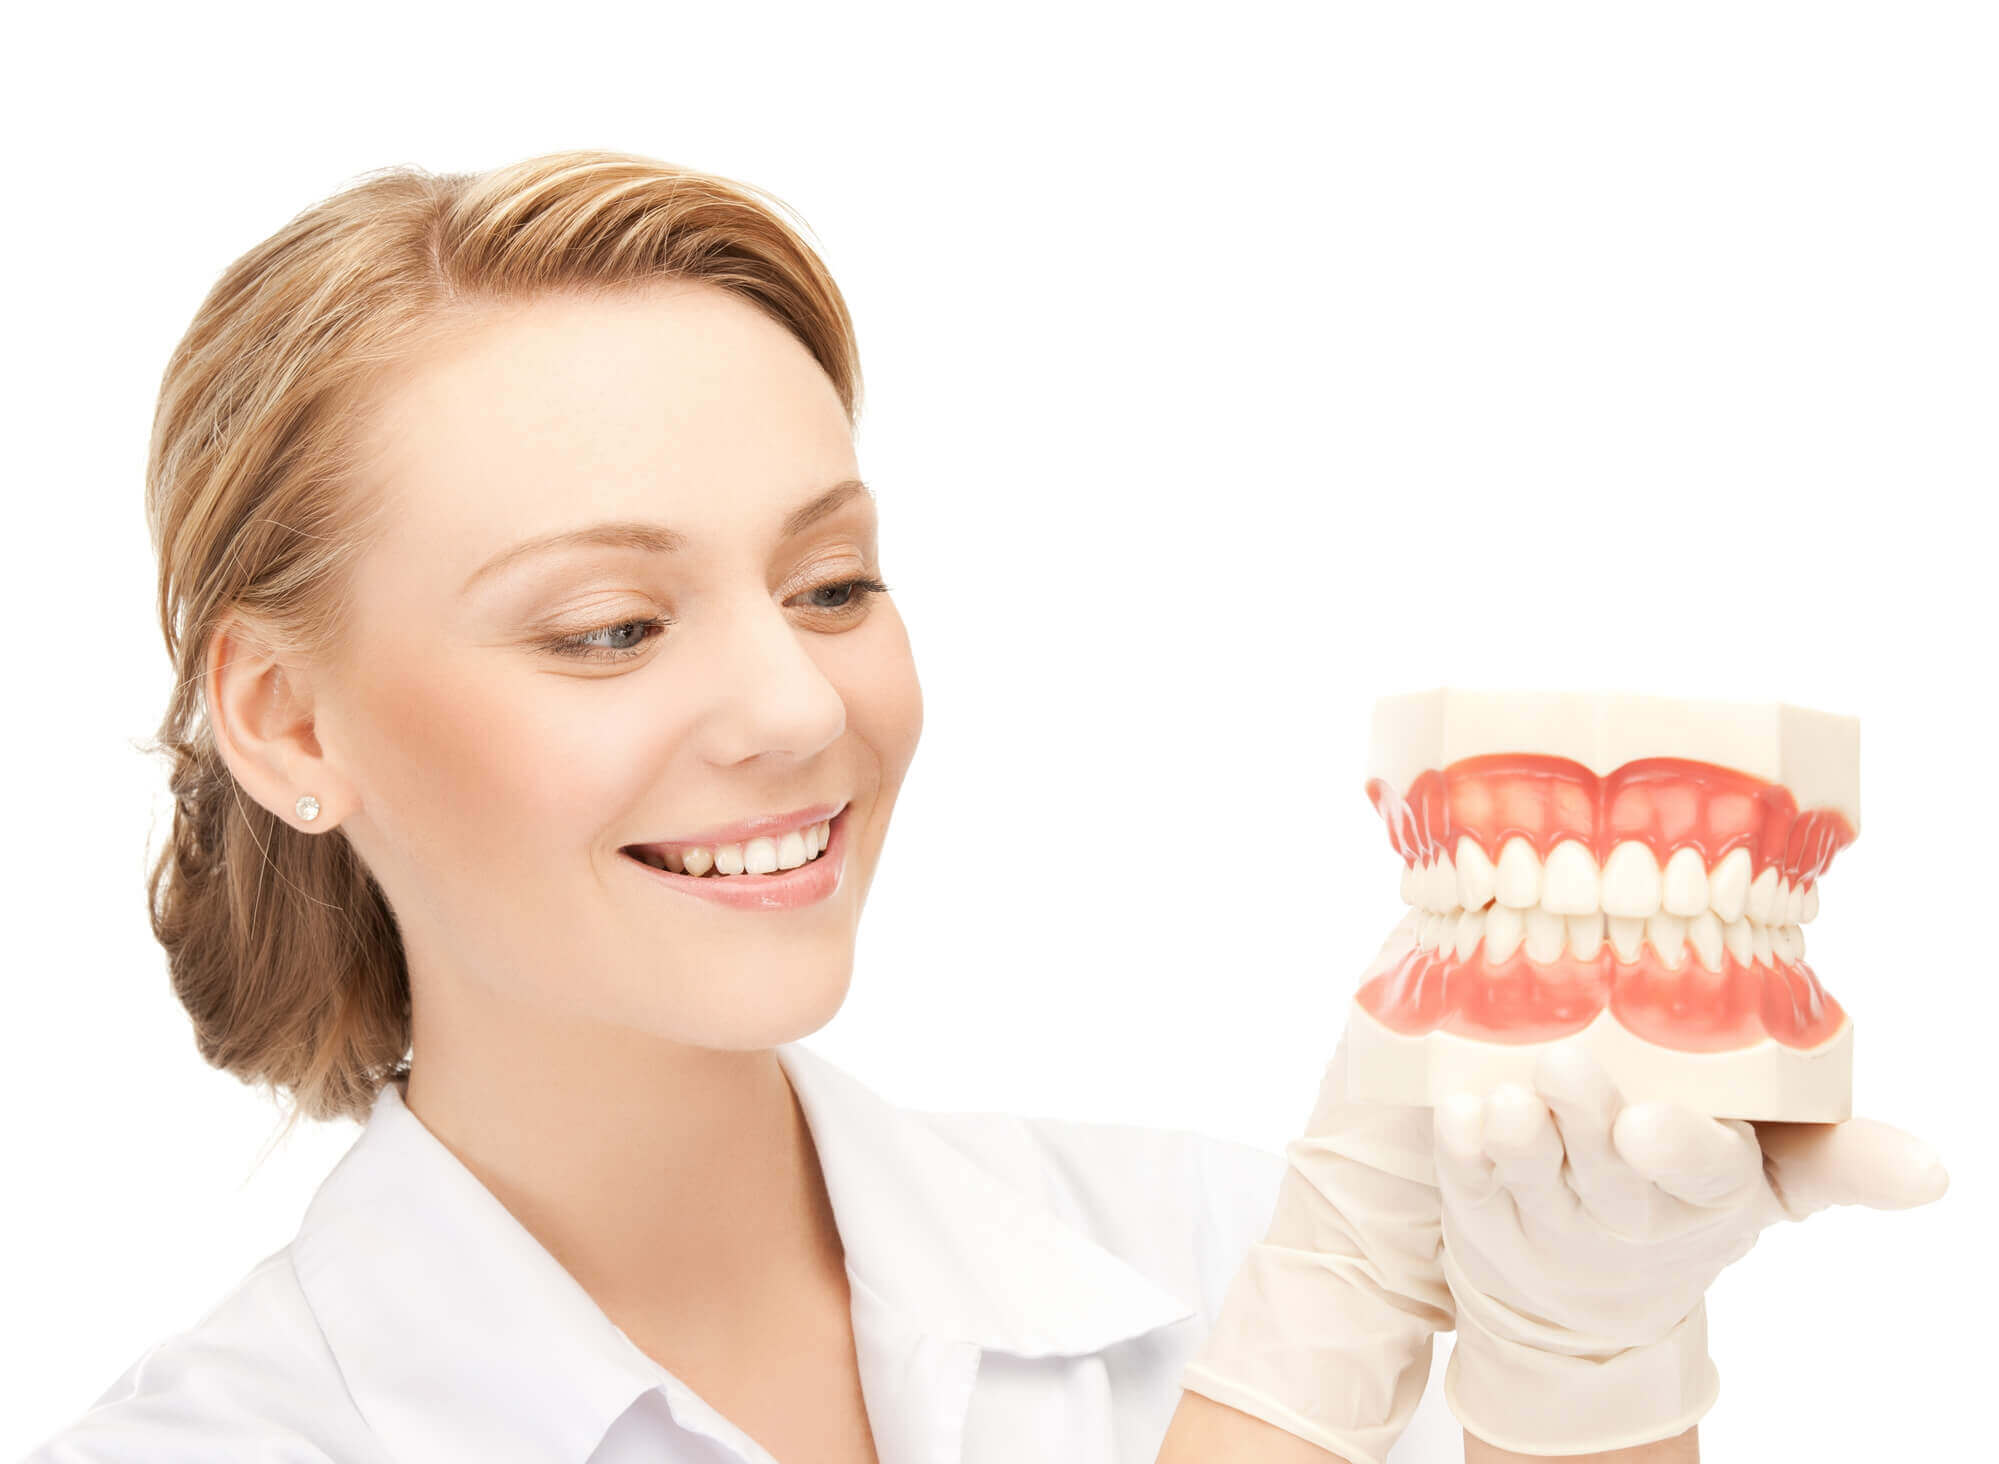 dentist holding a model of teeth and explaining Teeth Whitening in North Miami